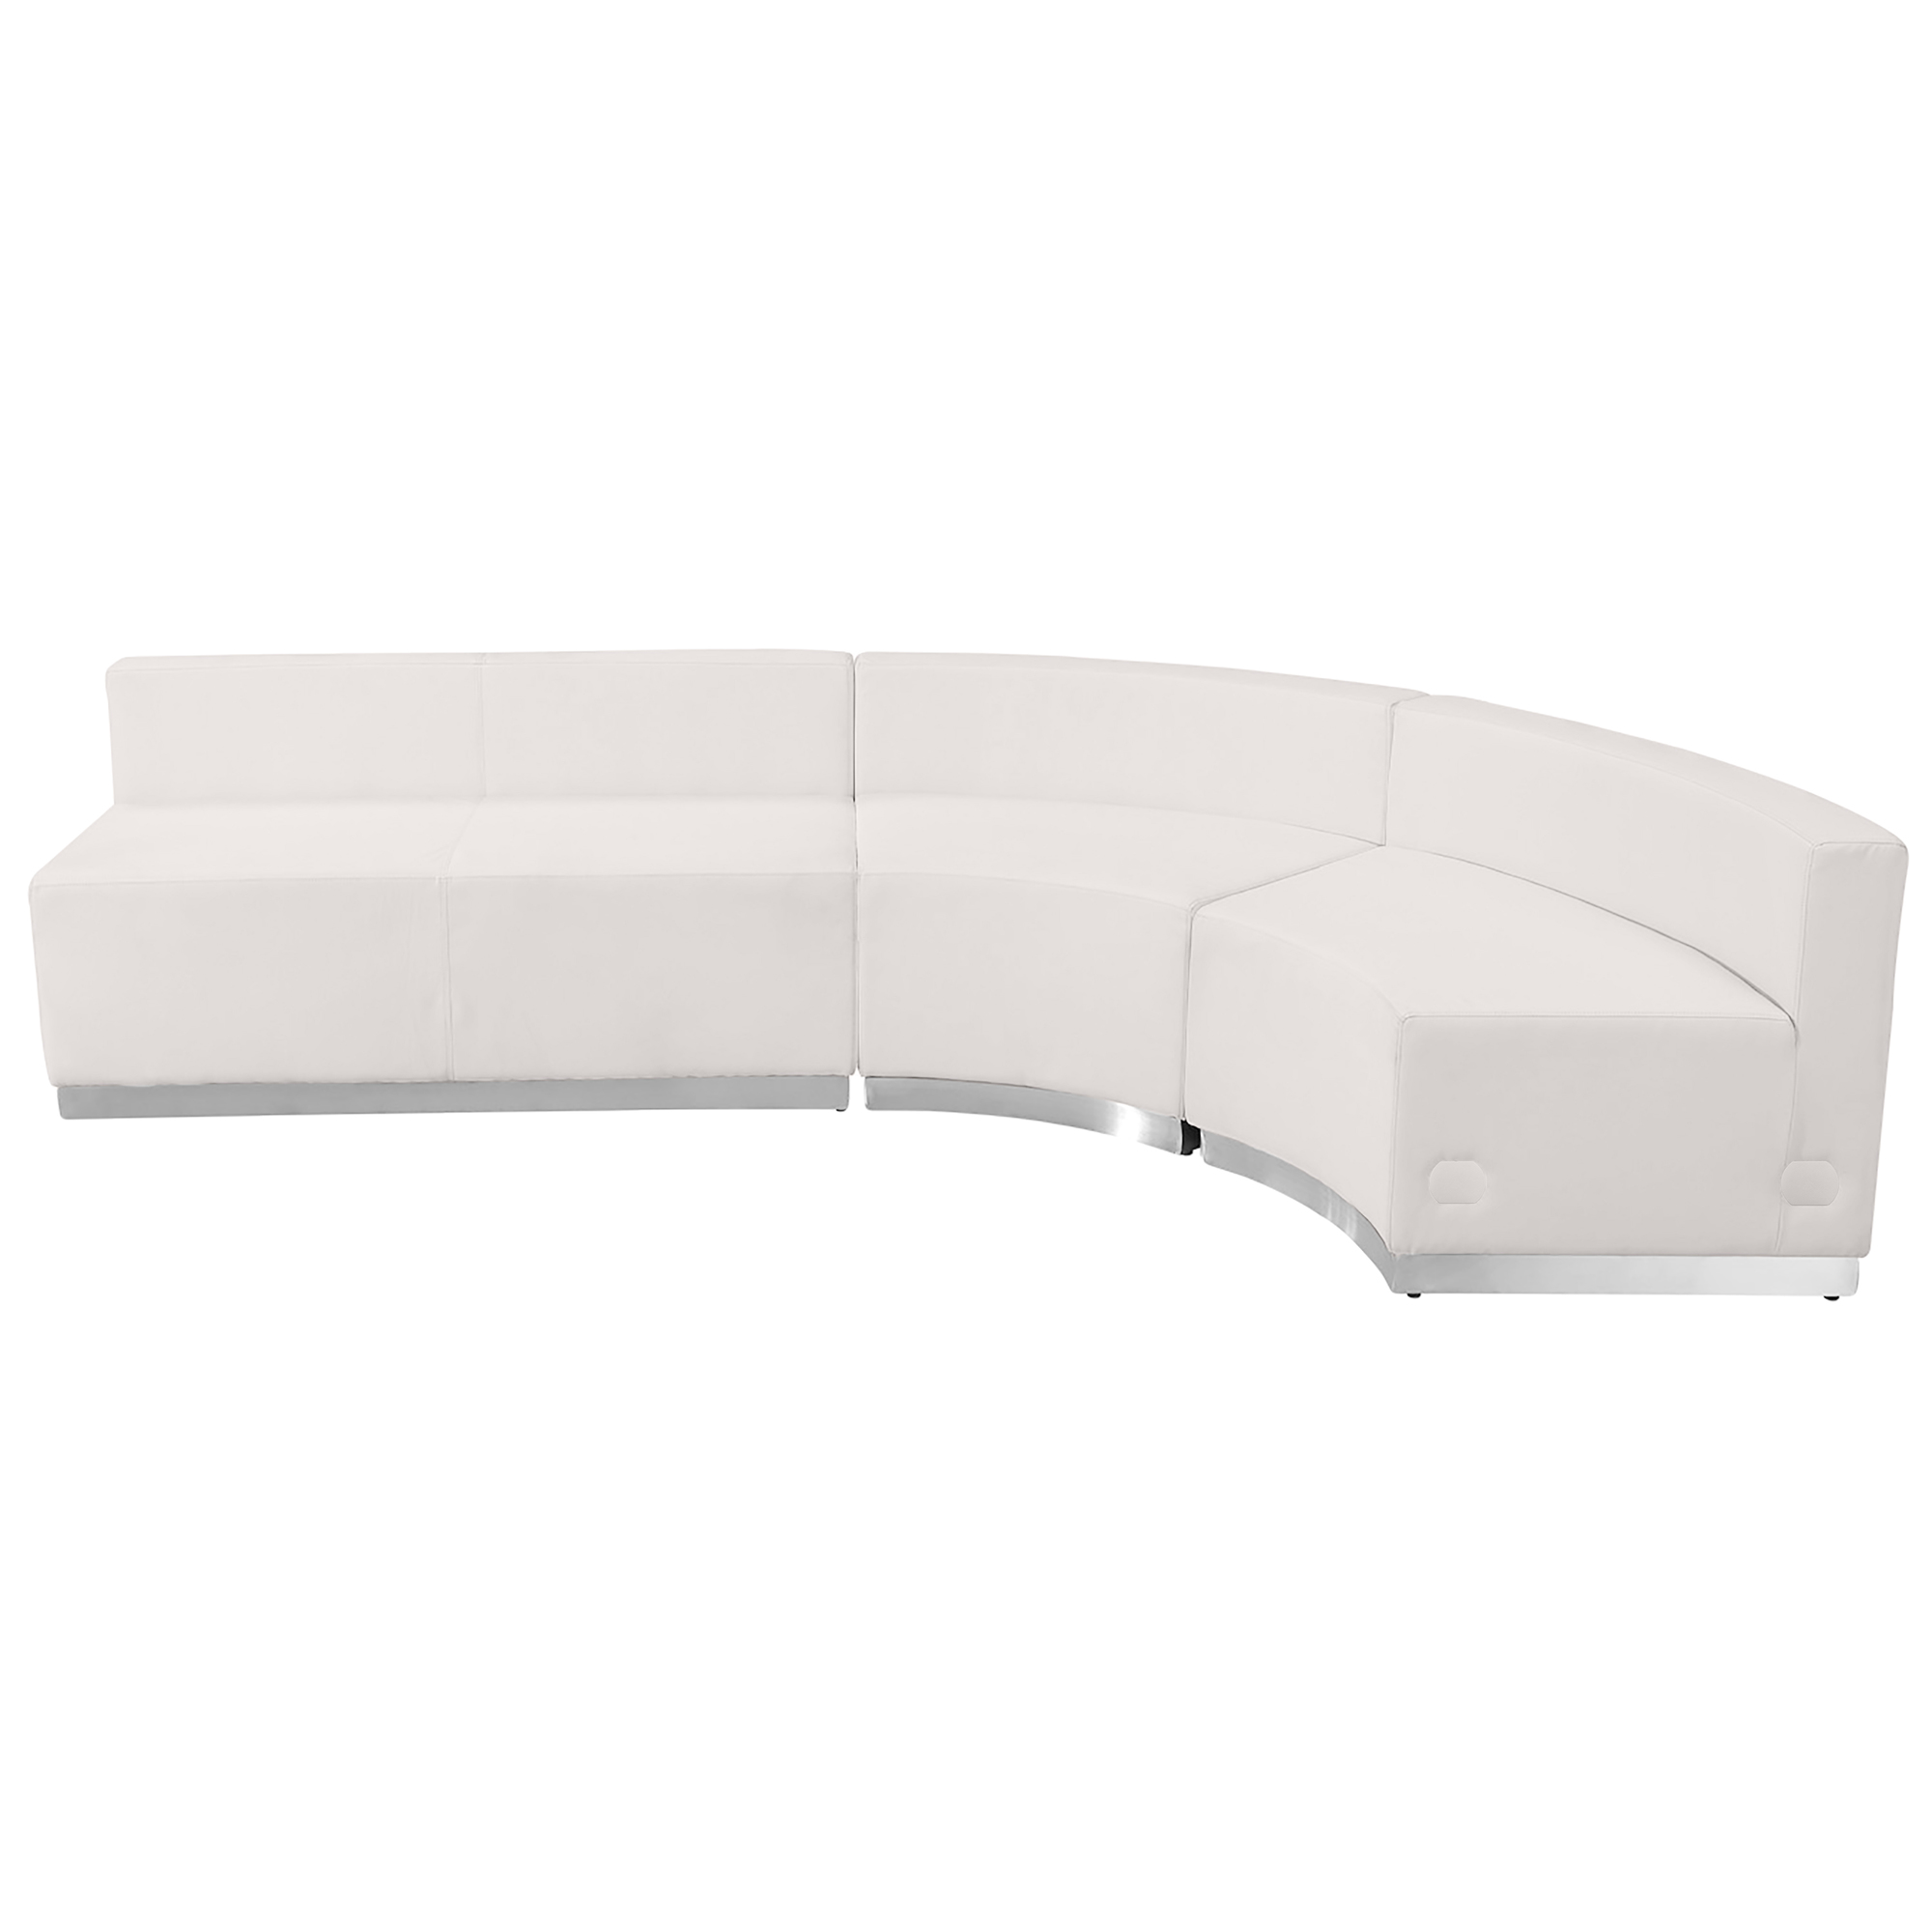 Flash Furniture, 3 PC White LeatherSoft Reception Configuration, Included (qty.) 3 Model ZB803750SWH